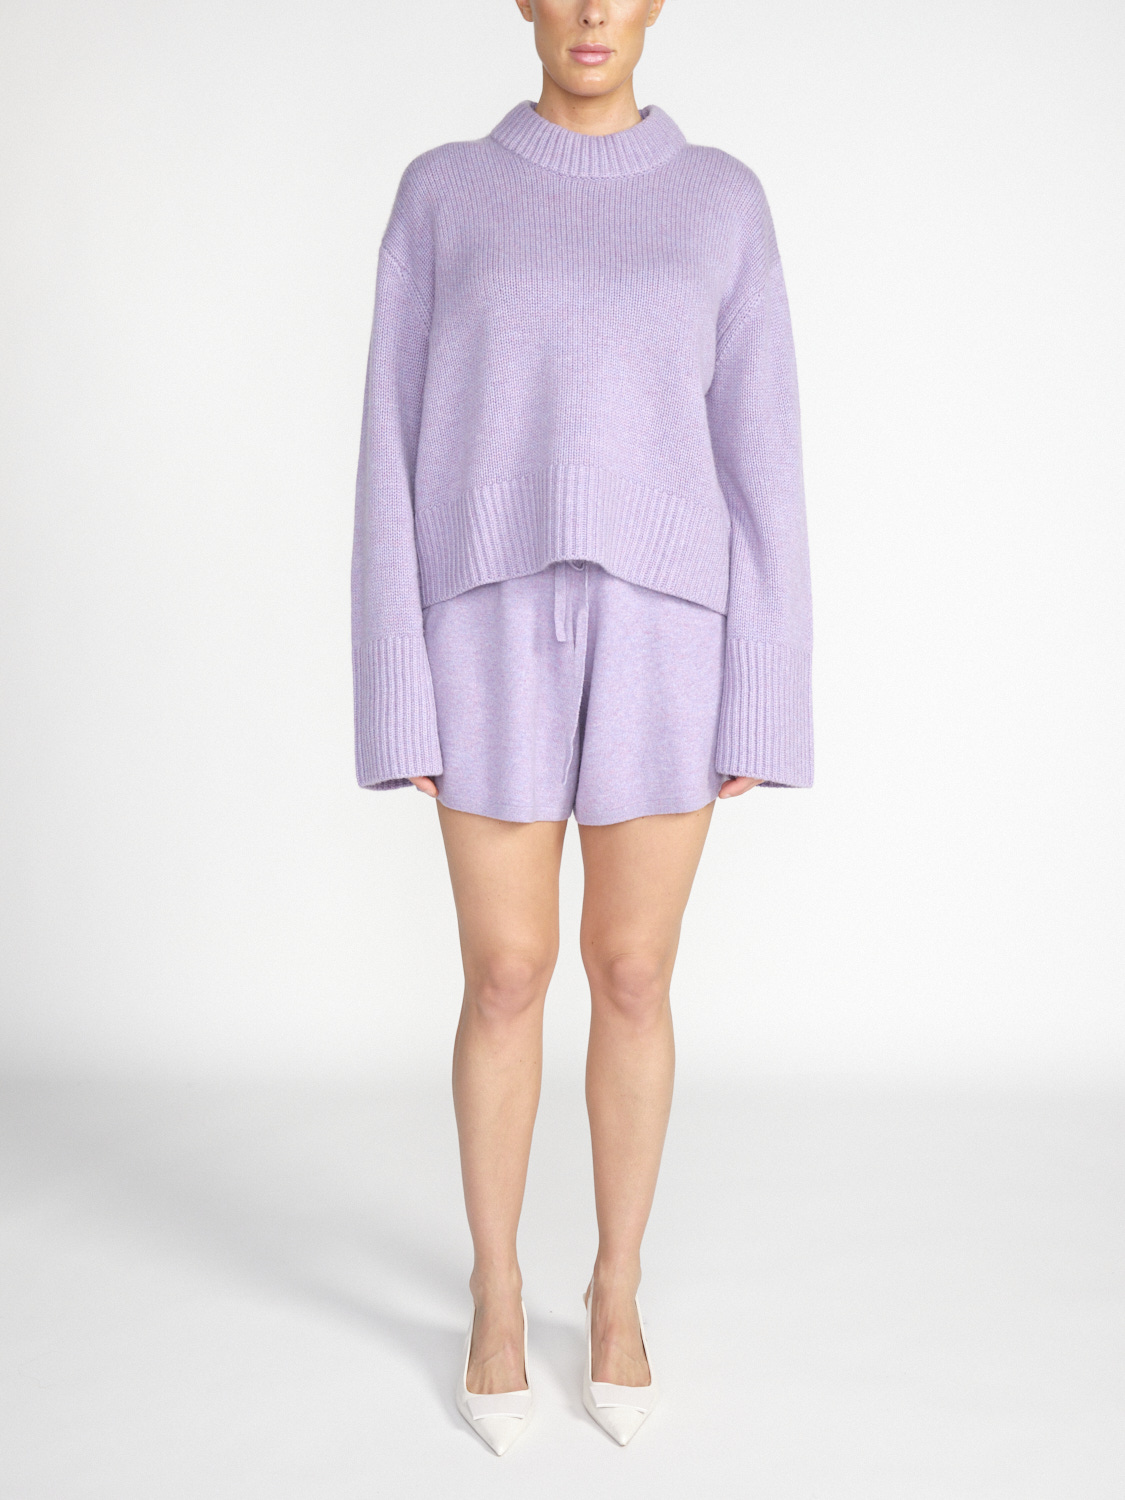 Lisa Yang Sony – Kurzer Cashmere Pullover   lila One Size